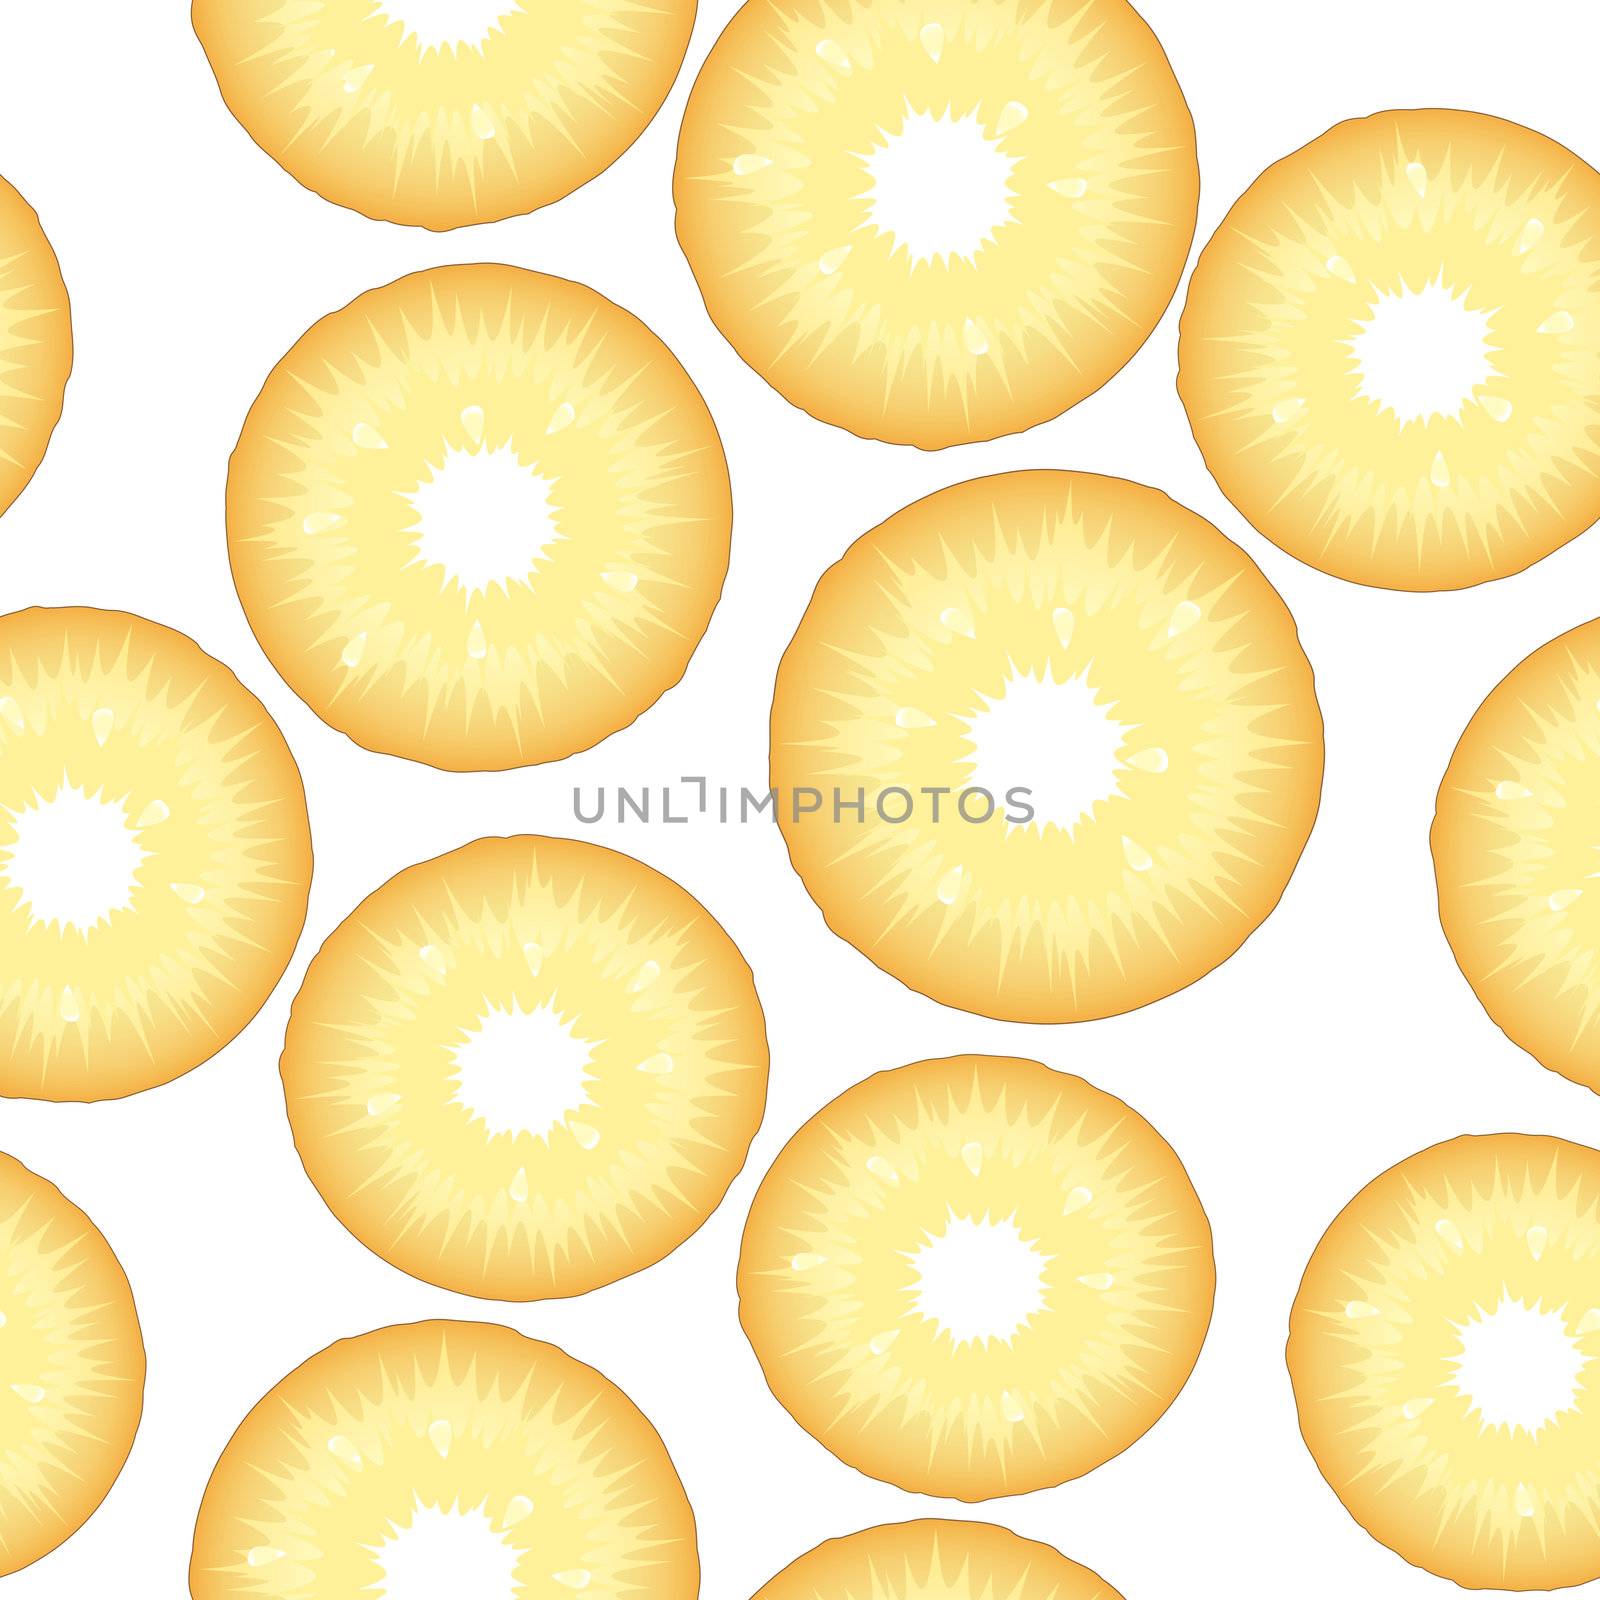 Pineapple slices background, seamless pattern